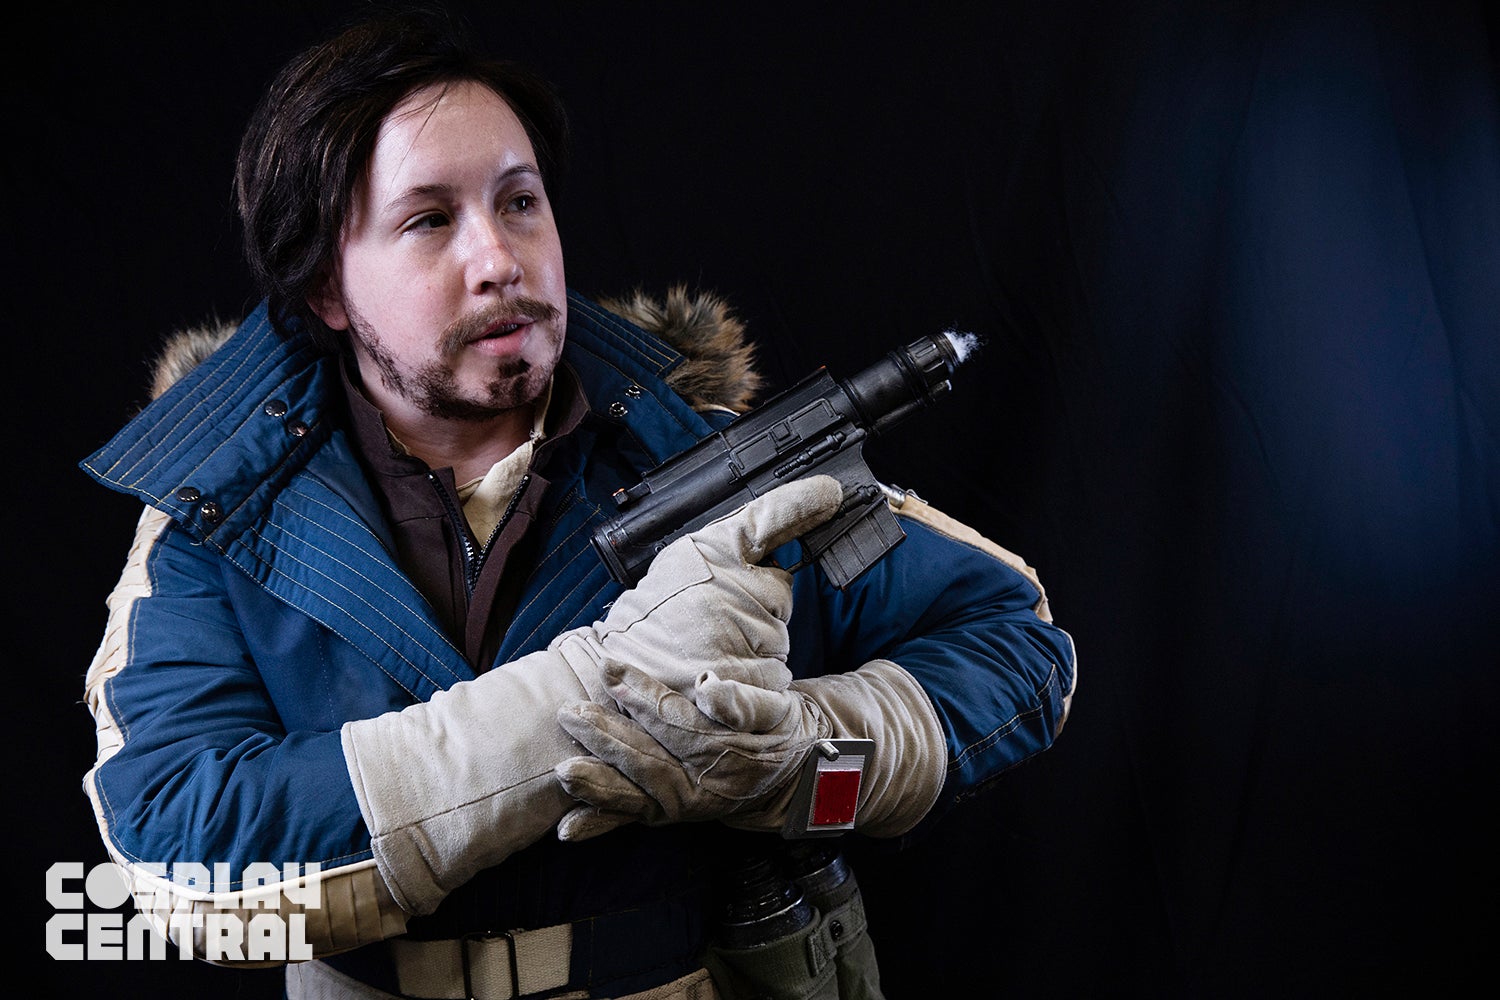 "Janiku Cosplay" as Captain Cassian Andor from New York Comic Con 2019